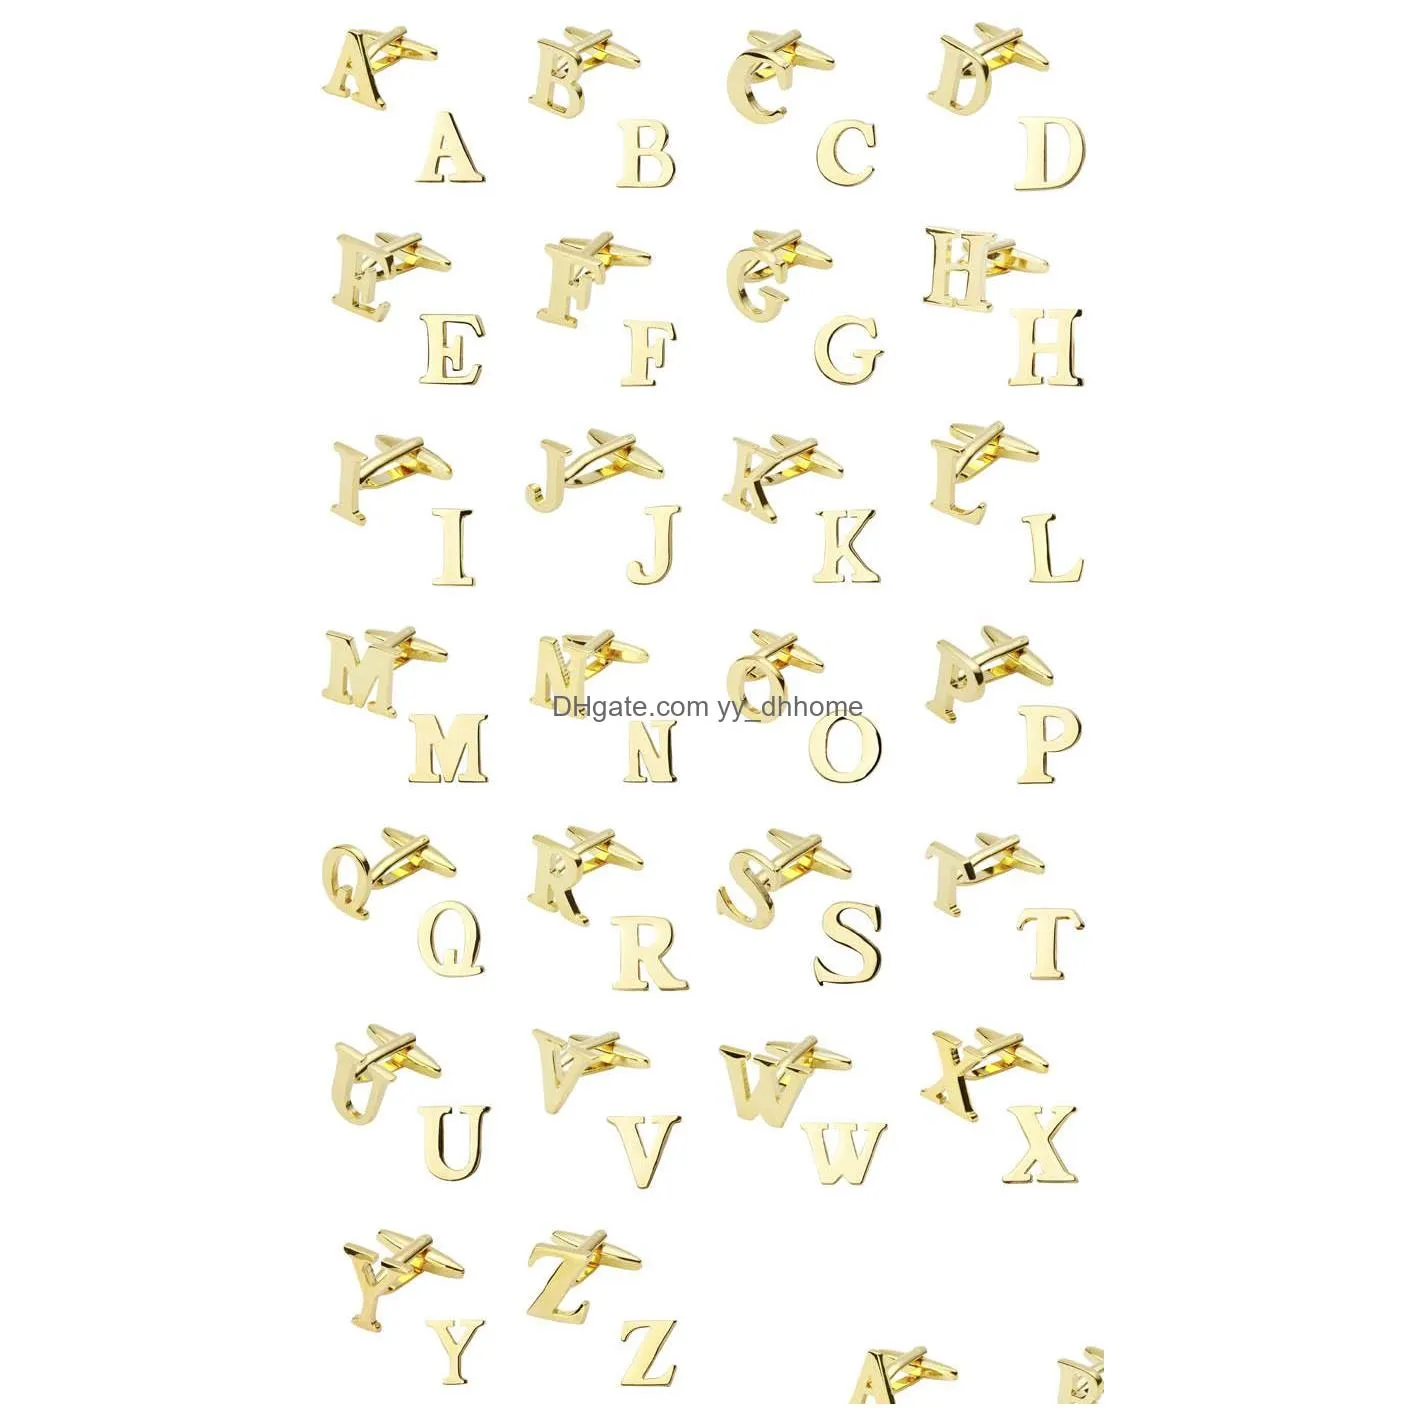 az english letter cufflinks french mens shirt sleeve button metal brass gold silver initial alphabet cuff links for men fashion jewelry